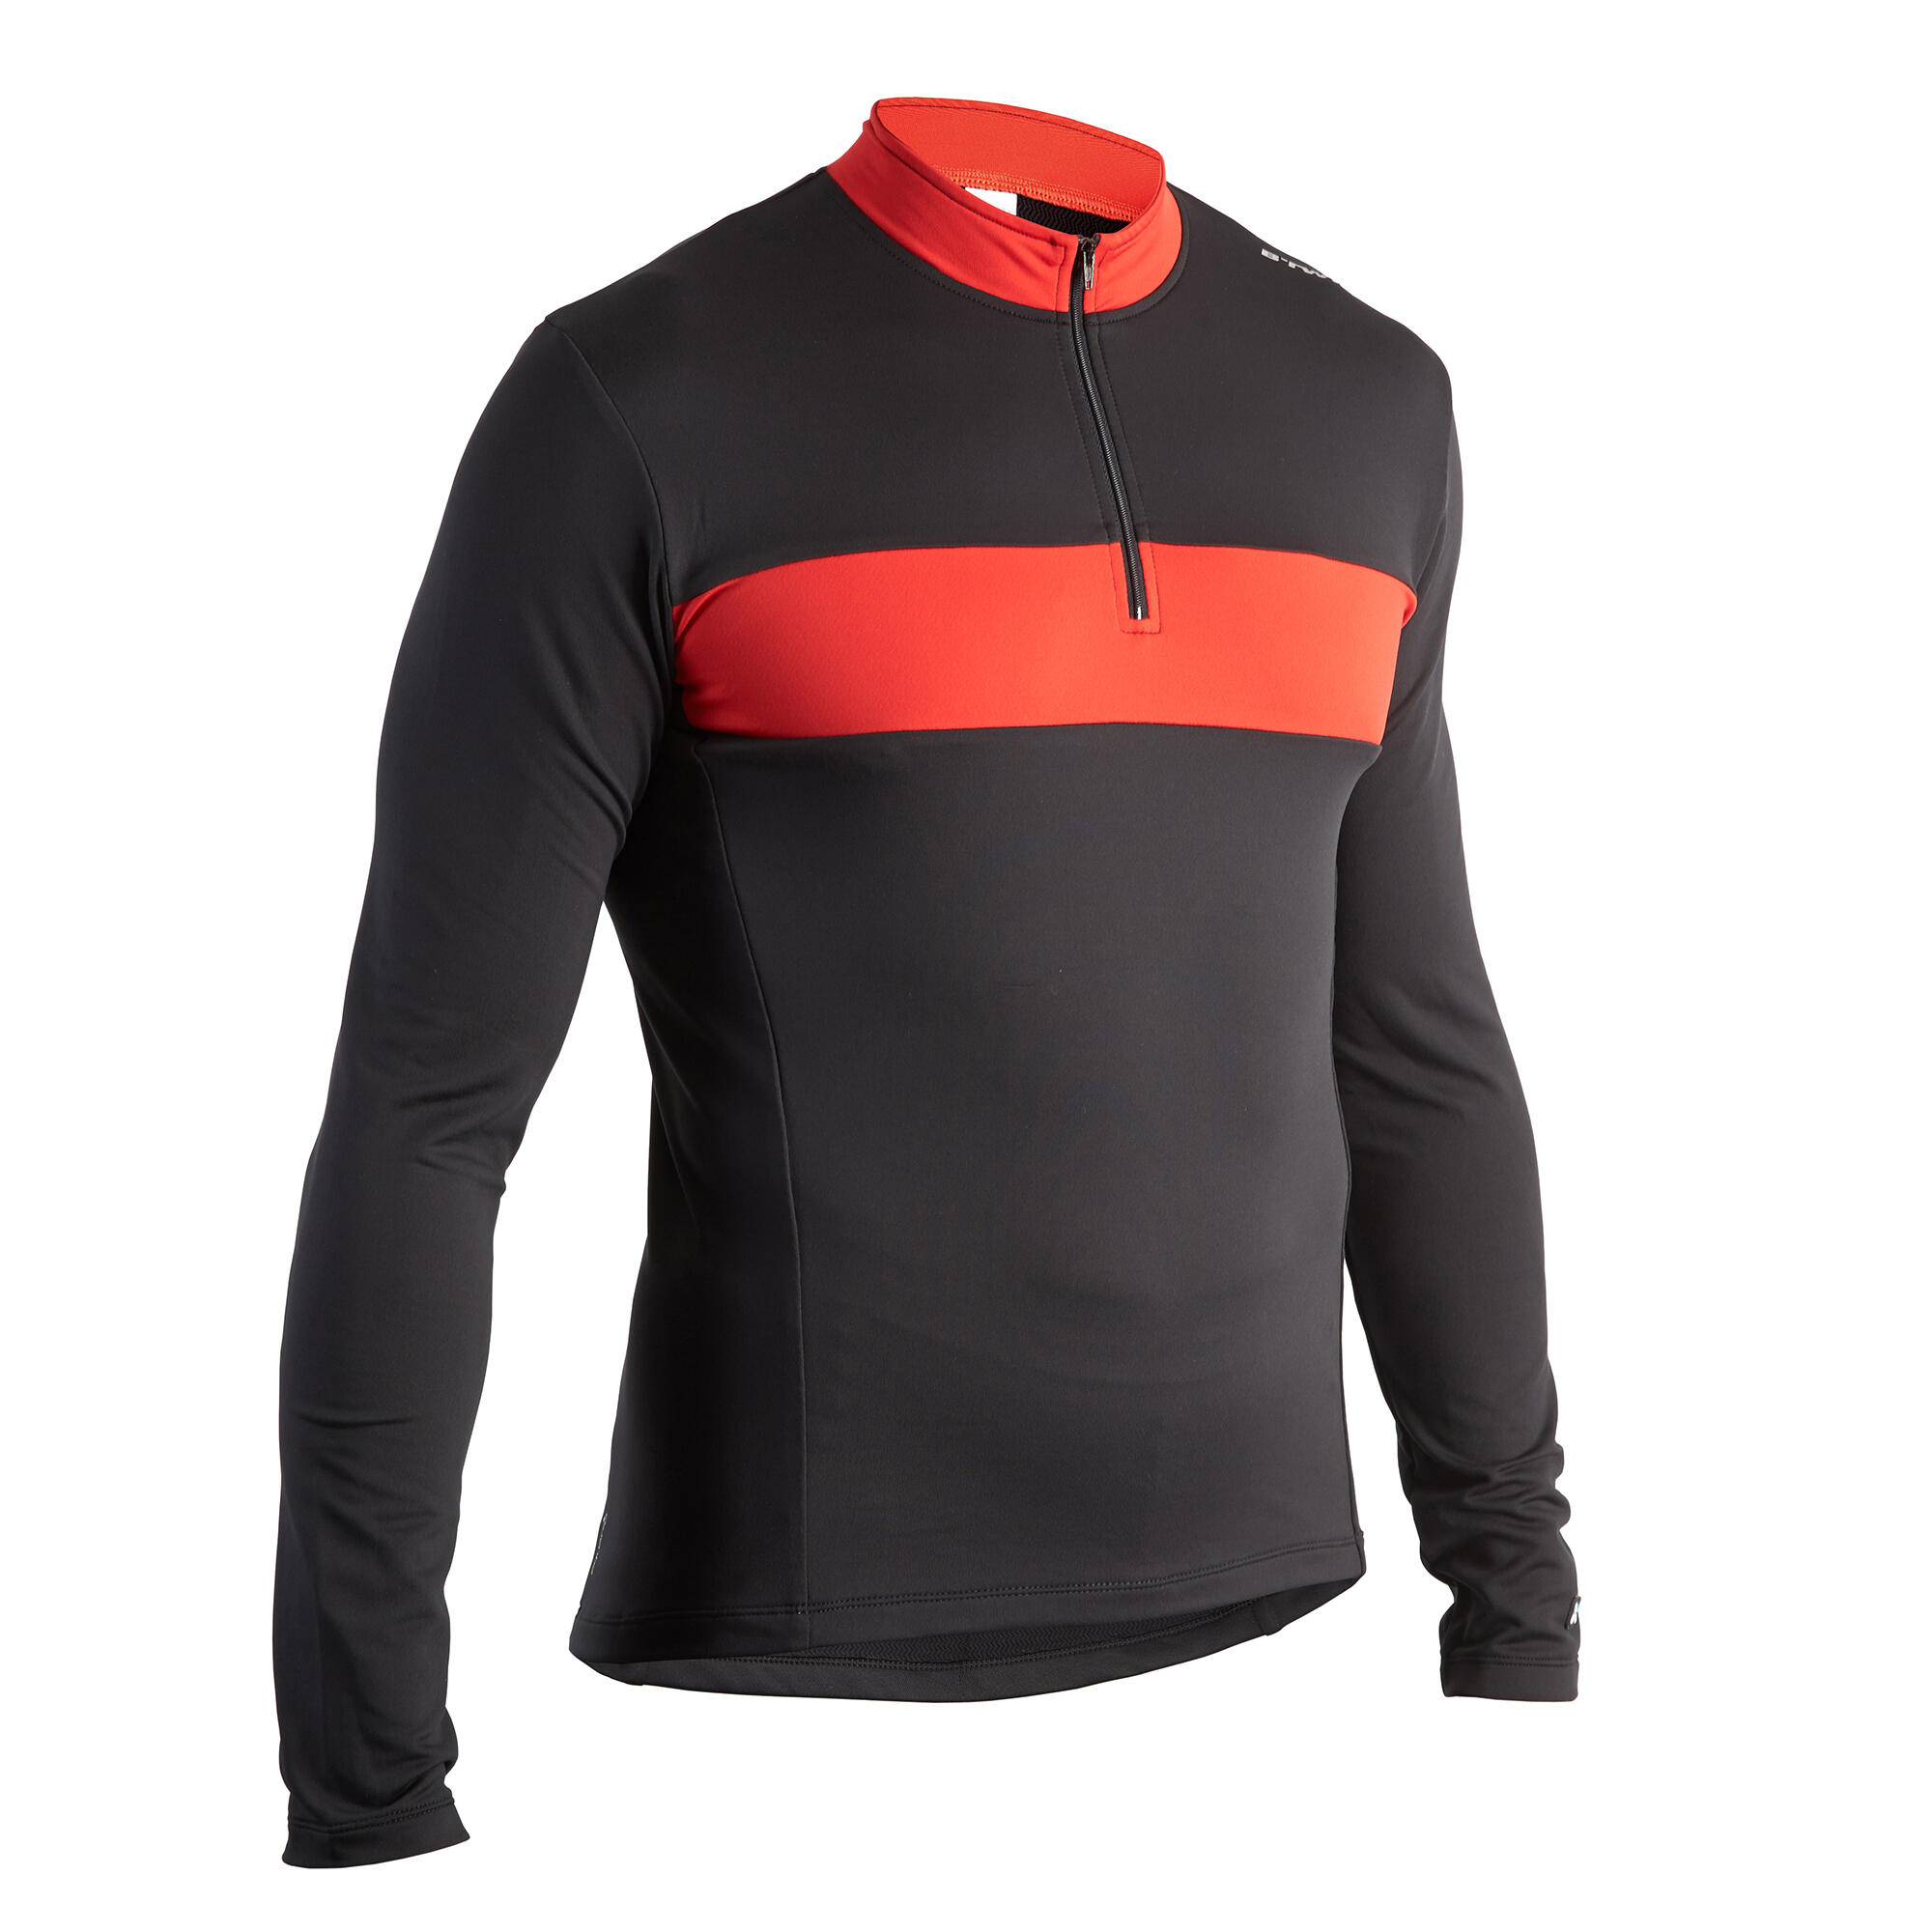 BTWIN 300 Cycling Long-sleeved Jersey - Black/Red